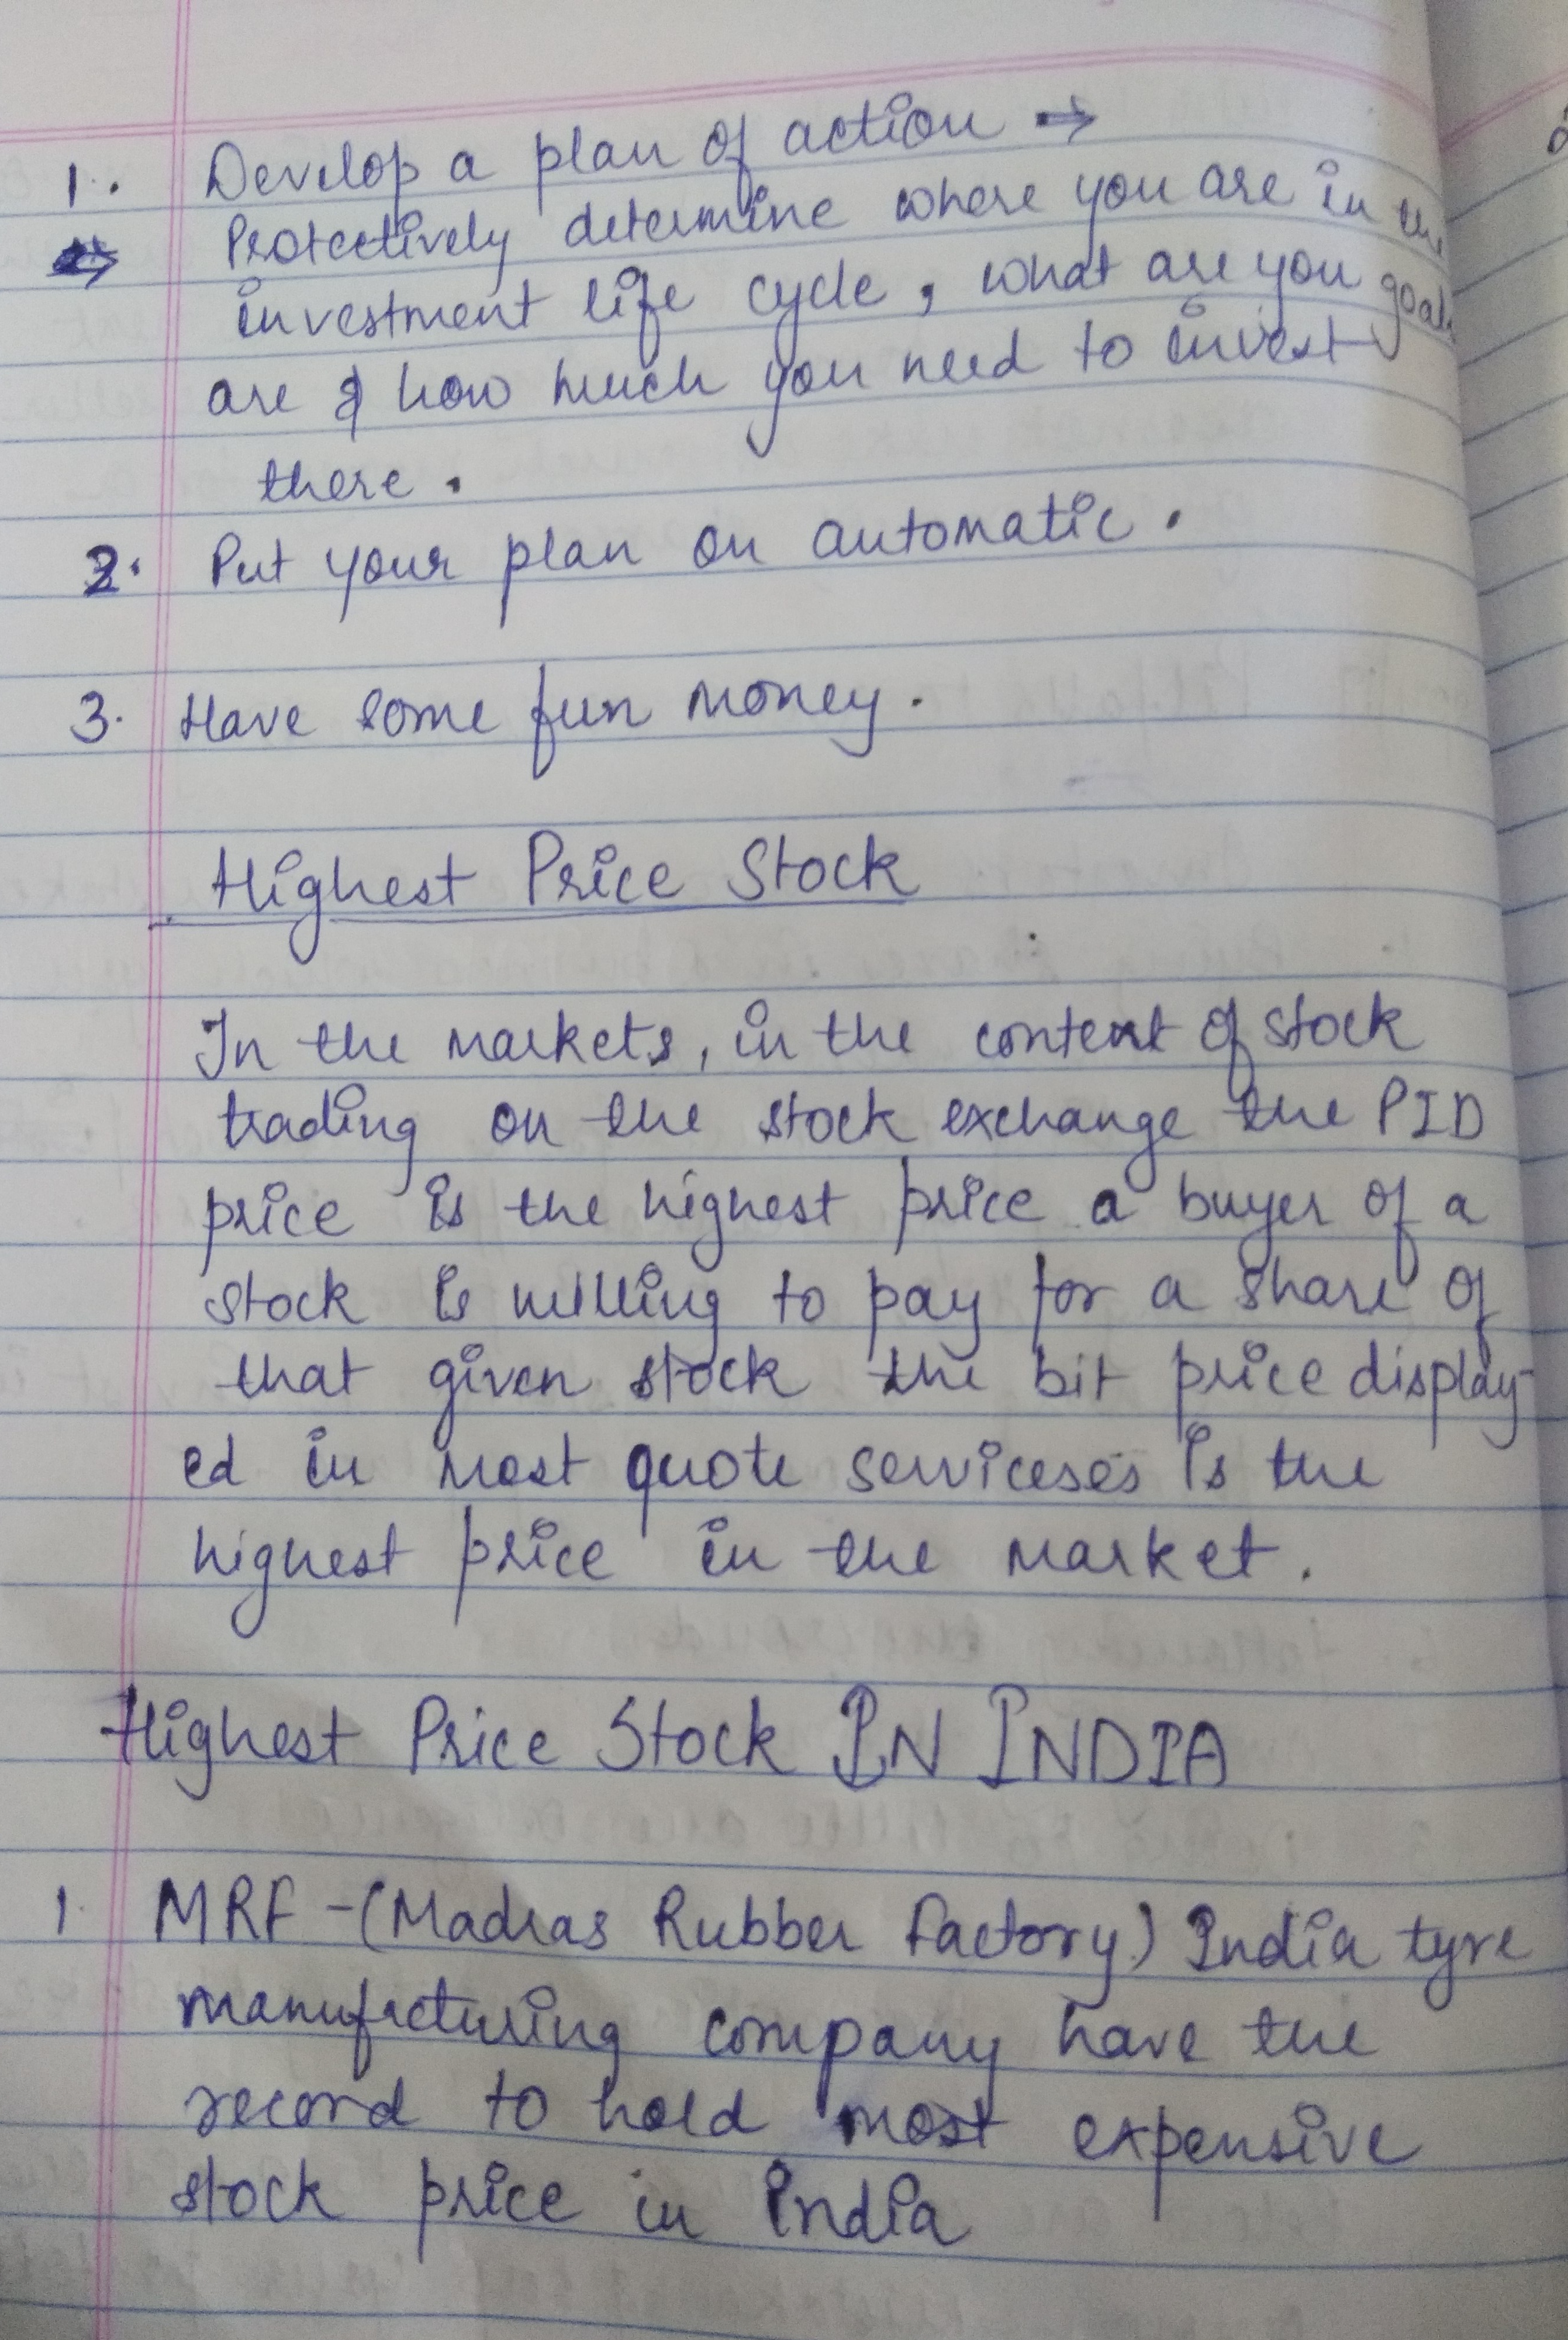 Things we should keep in mind while investing and types of stock ranges. -IMG_20190403_105128.jpg